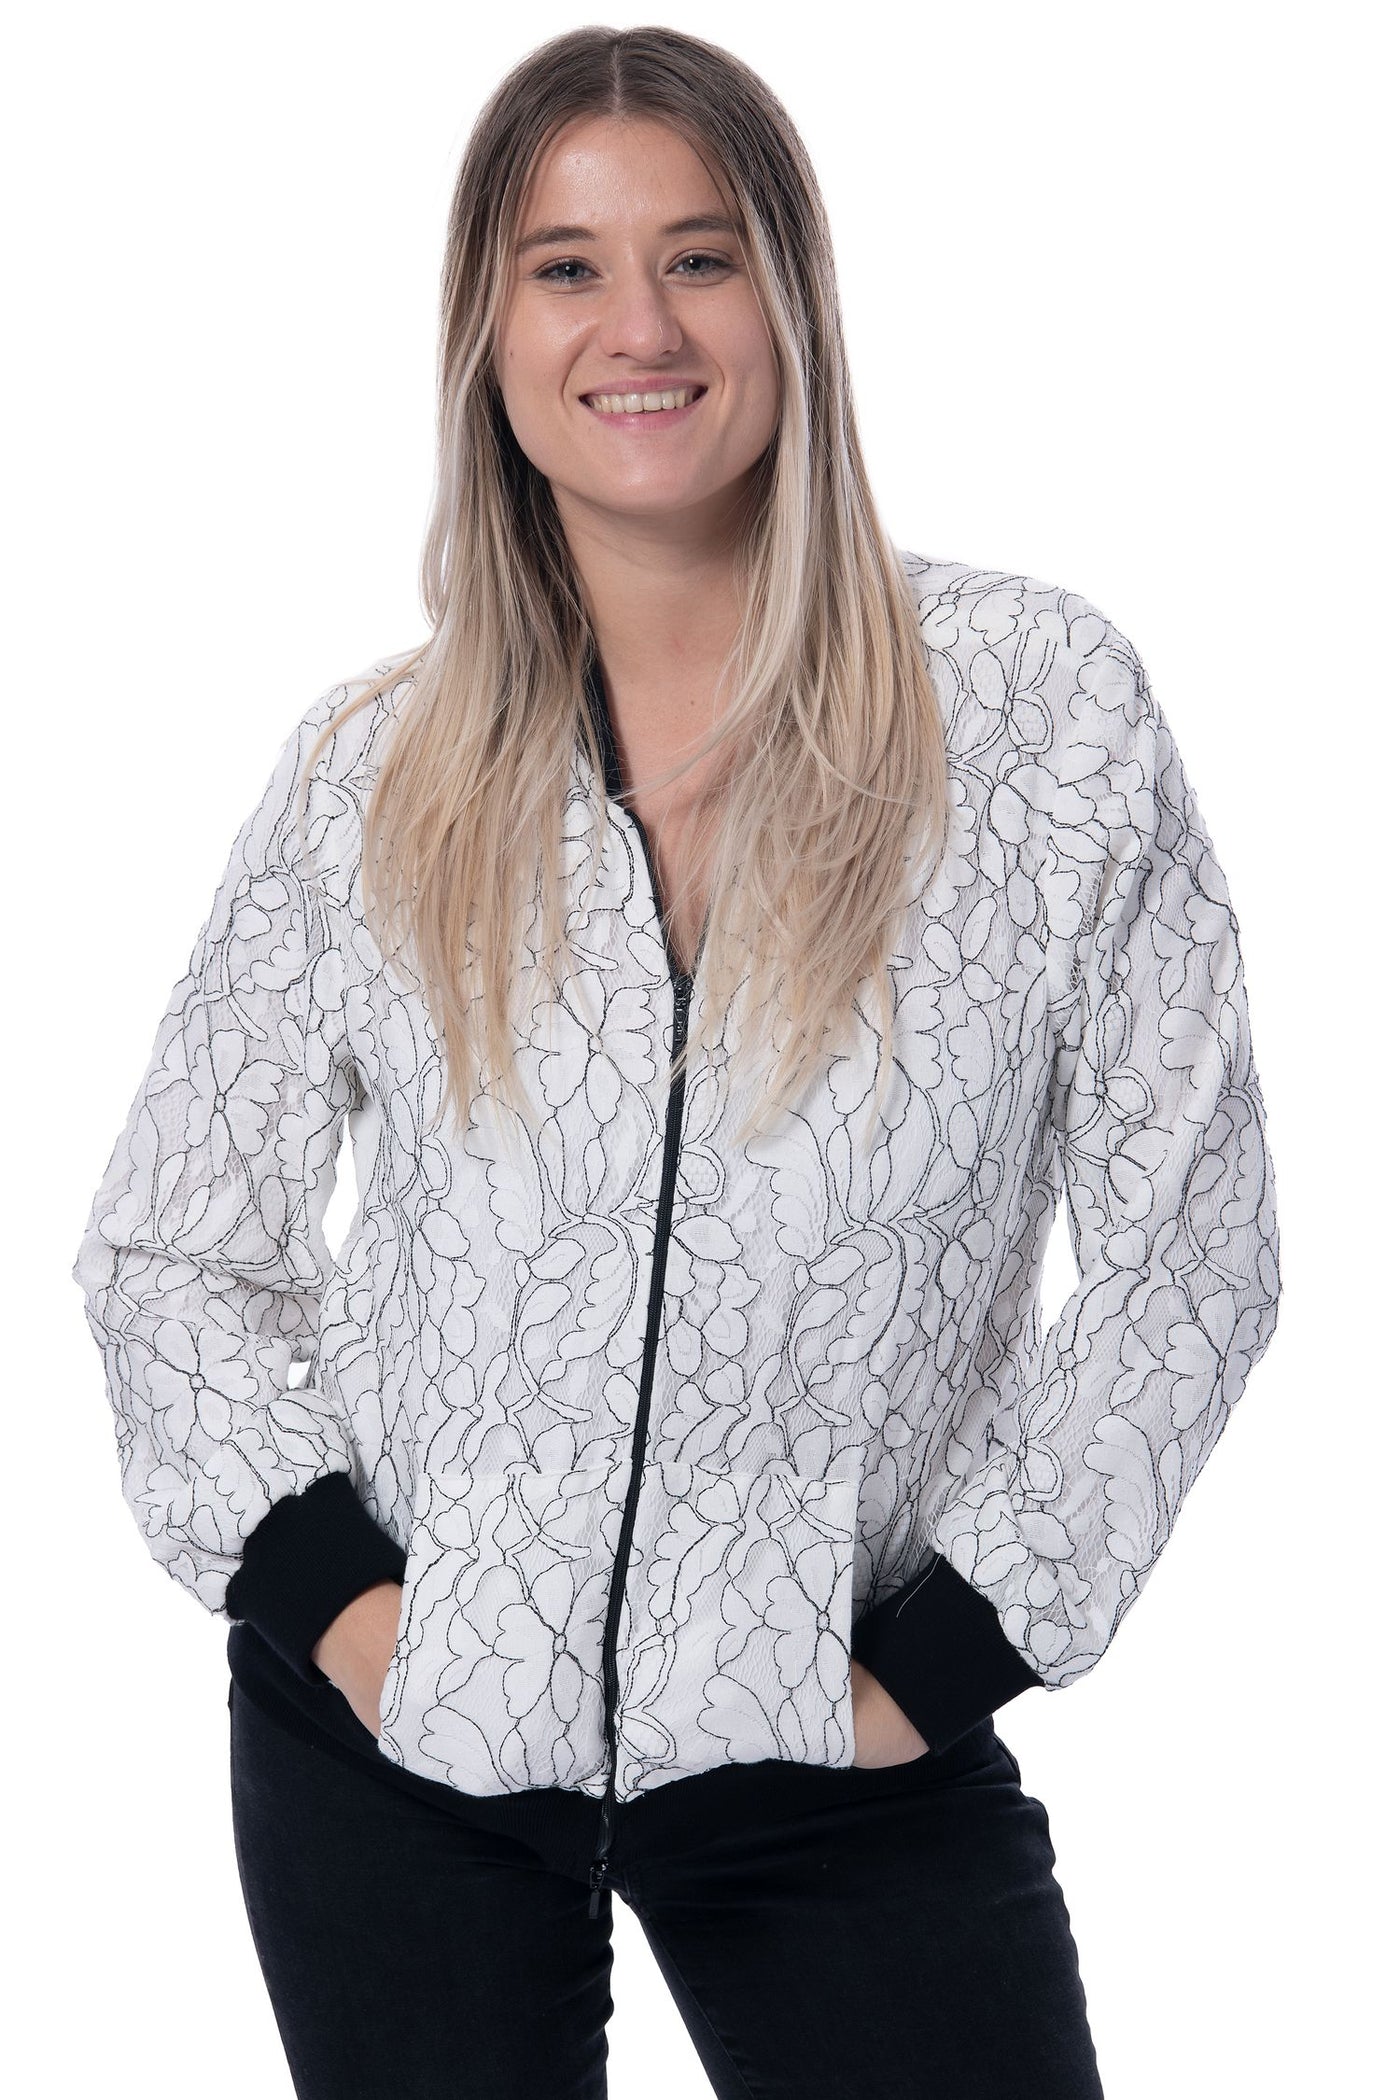 Anne Fontaine white lace zip cardigan, brand new